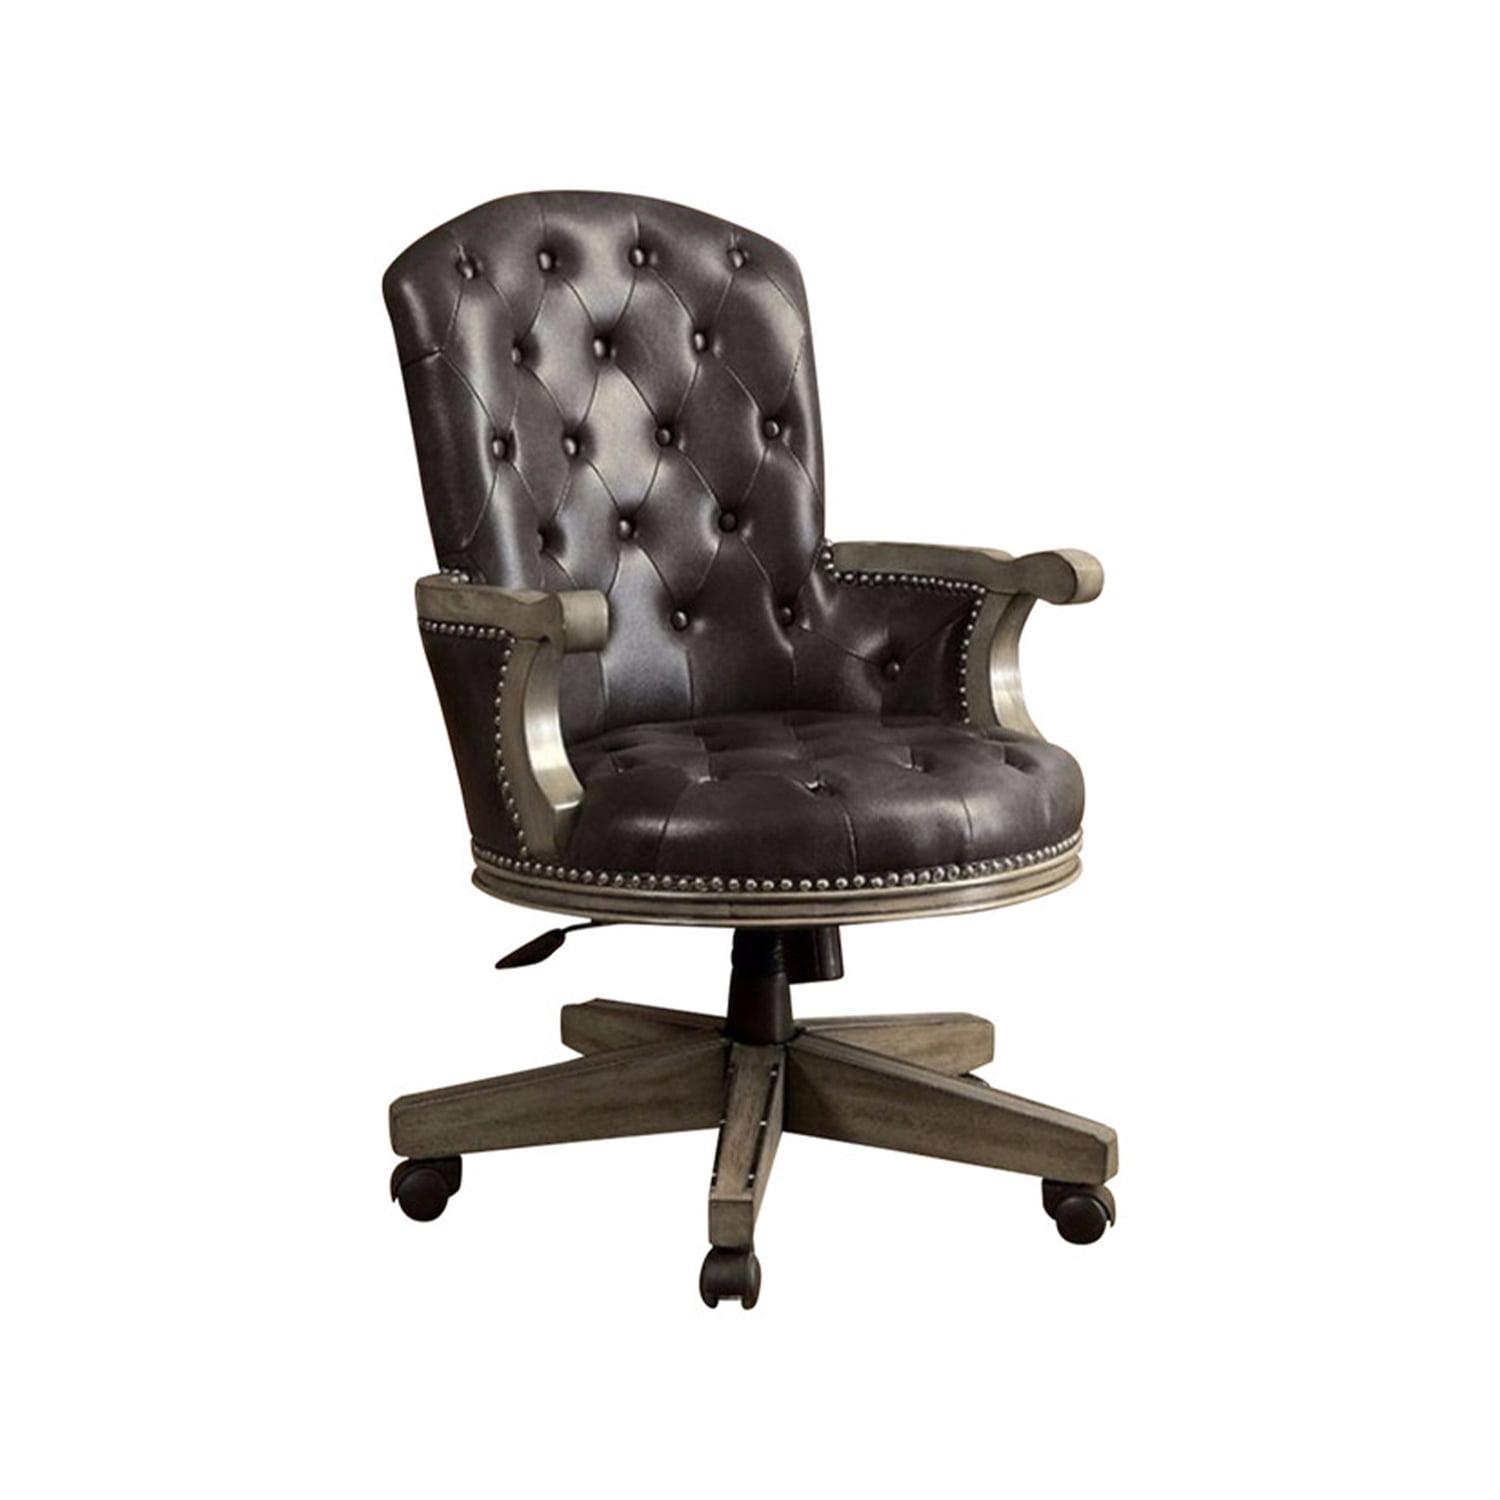 Elegant Black Leather Adjustable Office Chair with Wood Accents